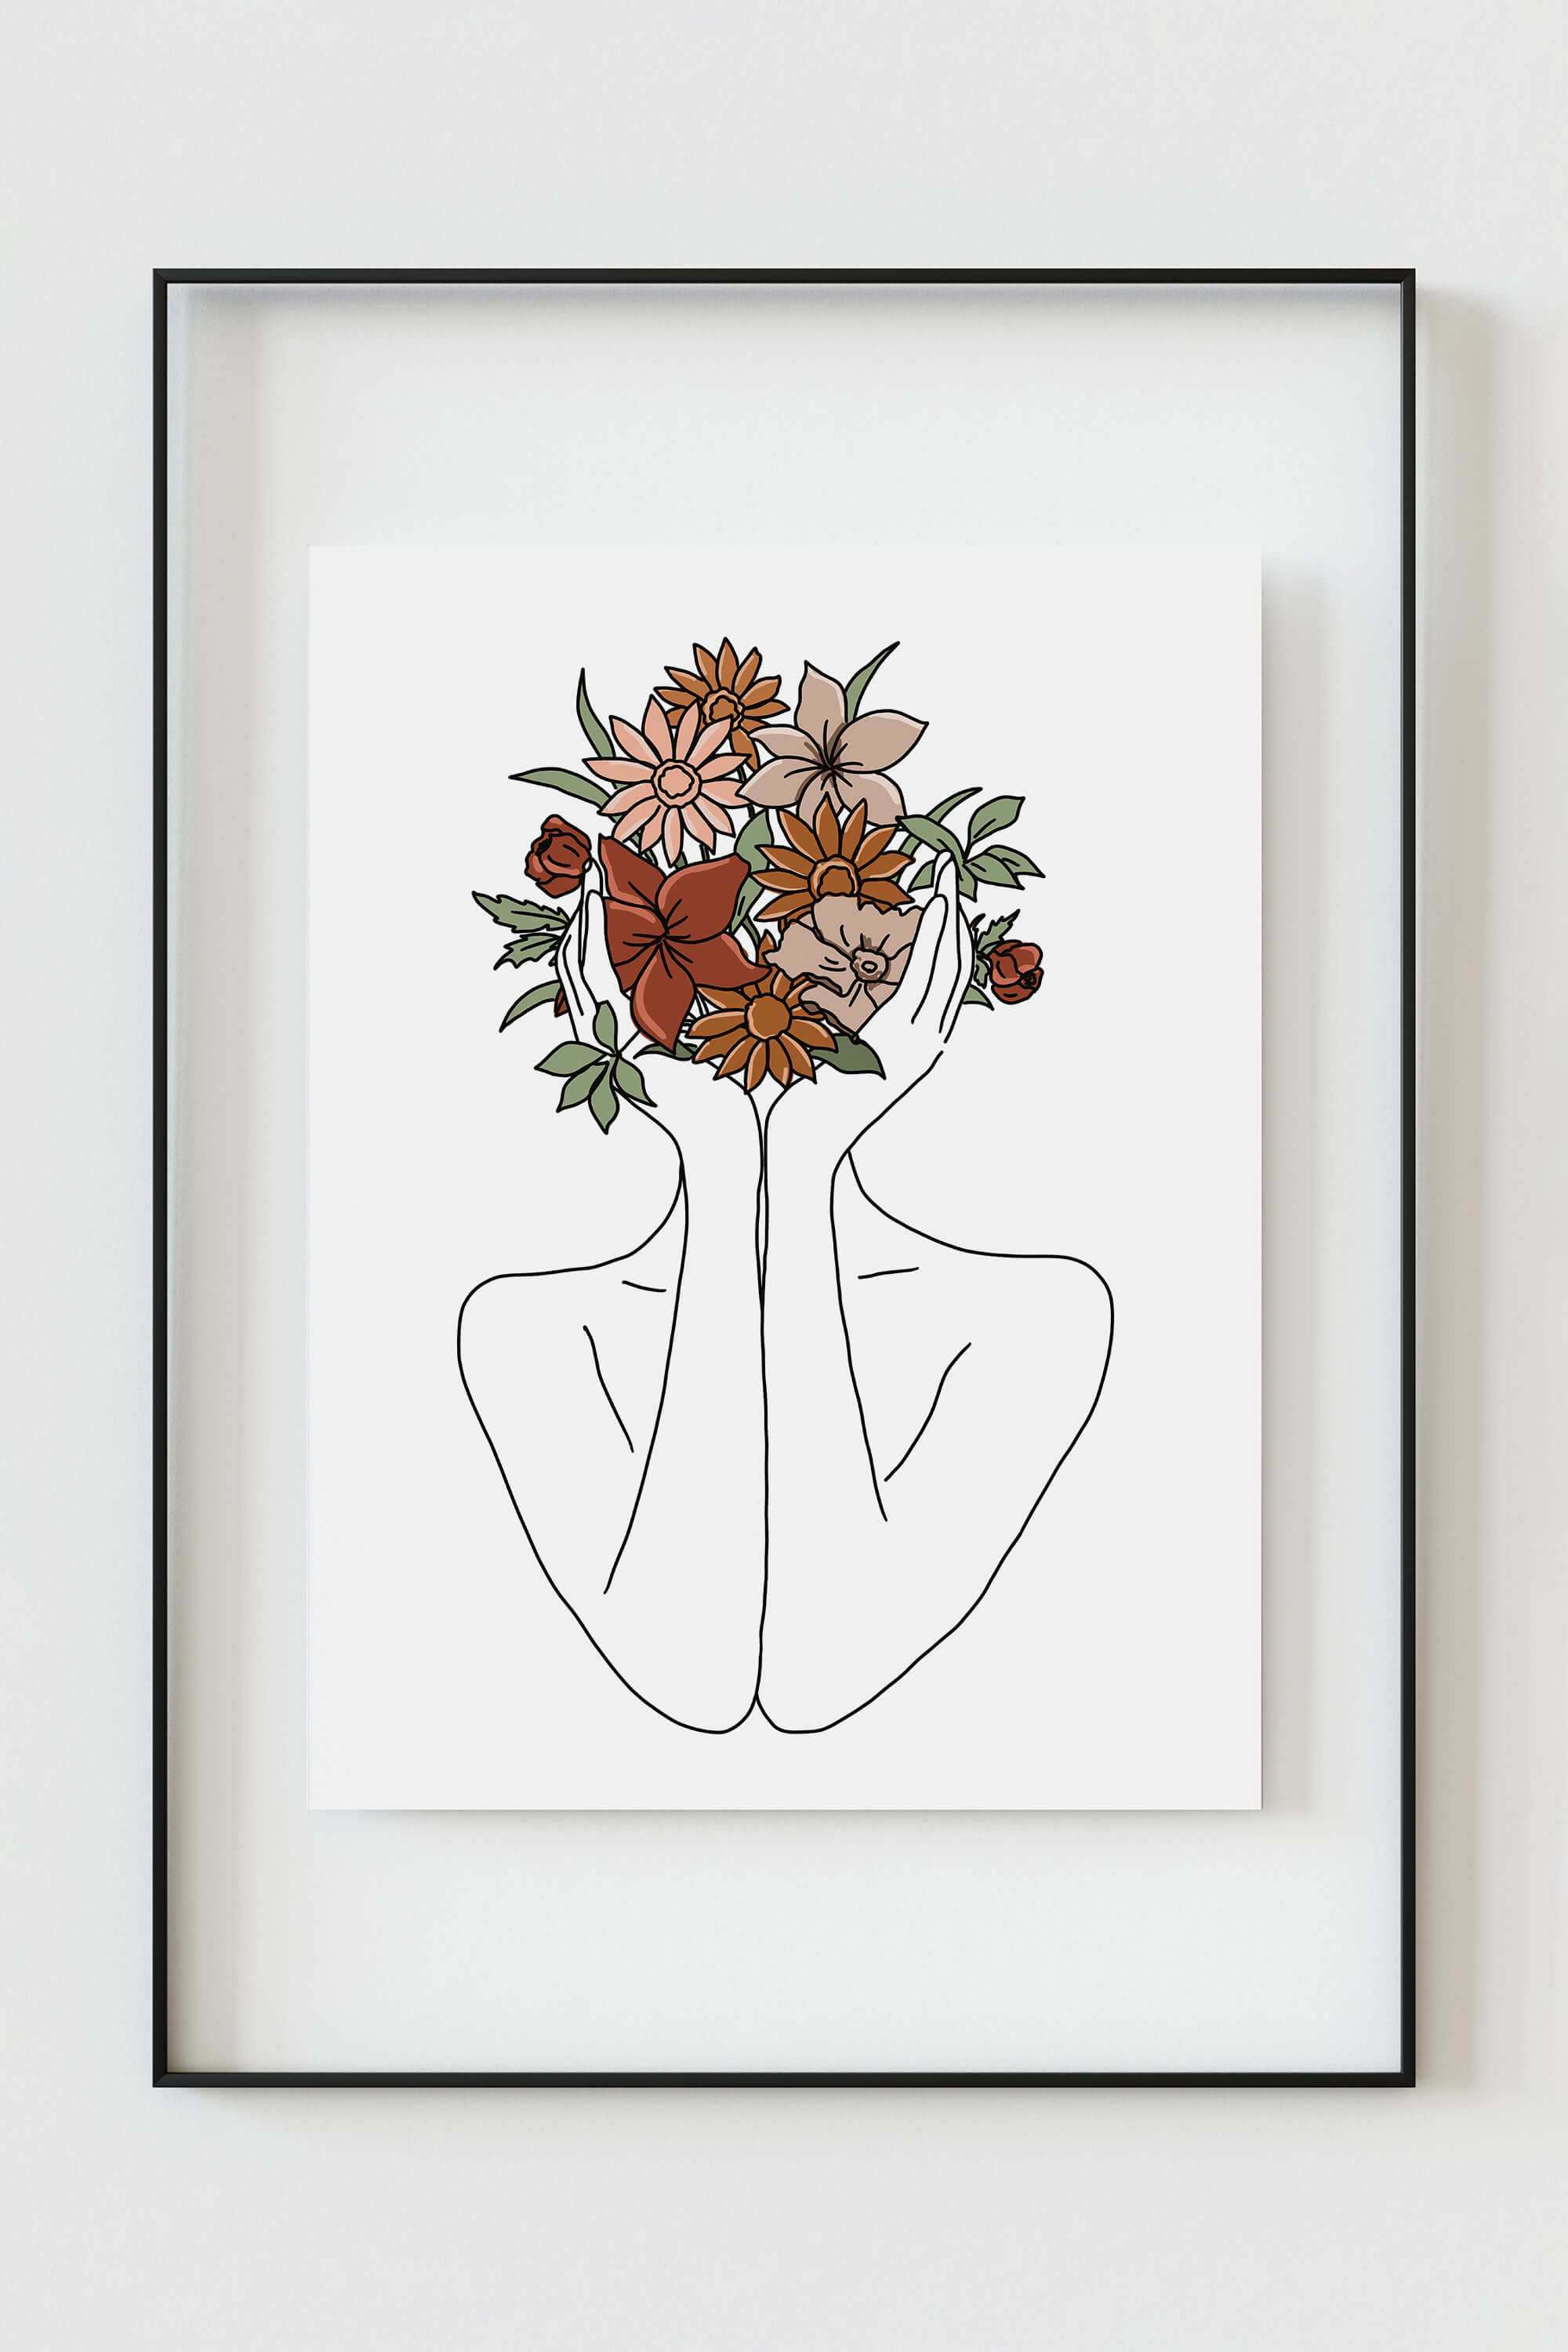 Abstract floral face art print showcasing intricate details in fine line drawing, a true visual delight.